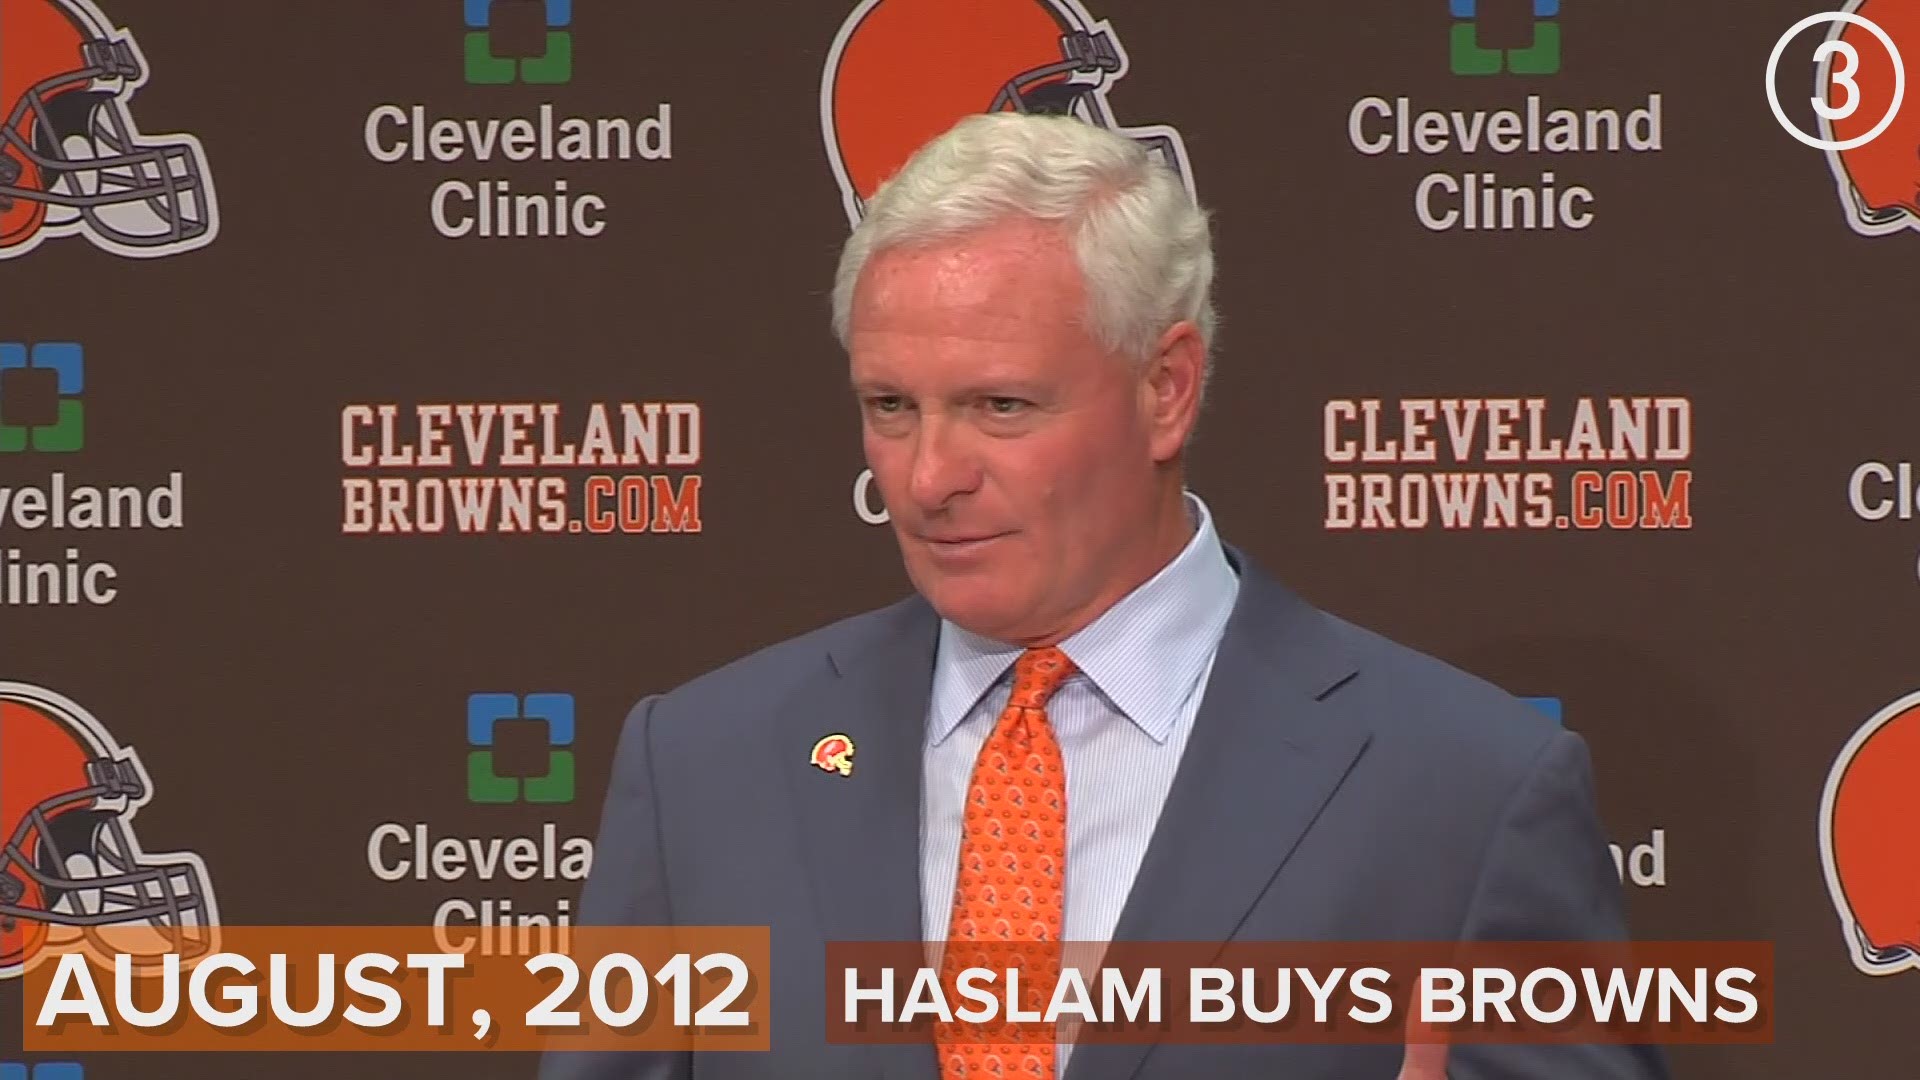 Here we go again!  As Jimmy Haslam prepares for another coaching search, we look back at some of his previous statements in similar situations.